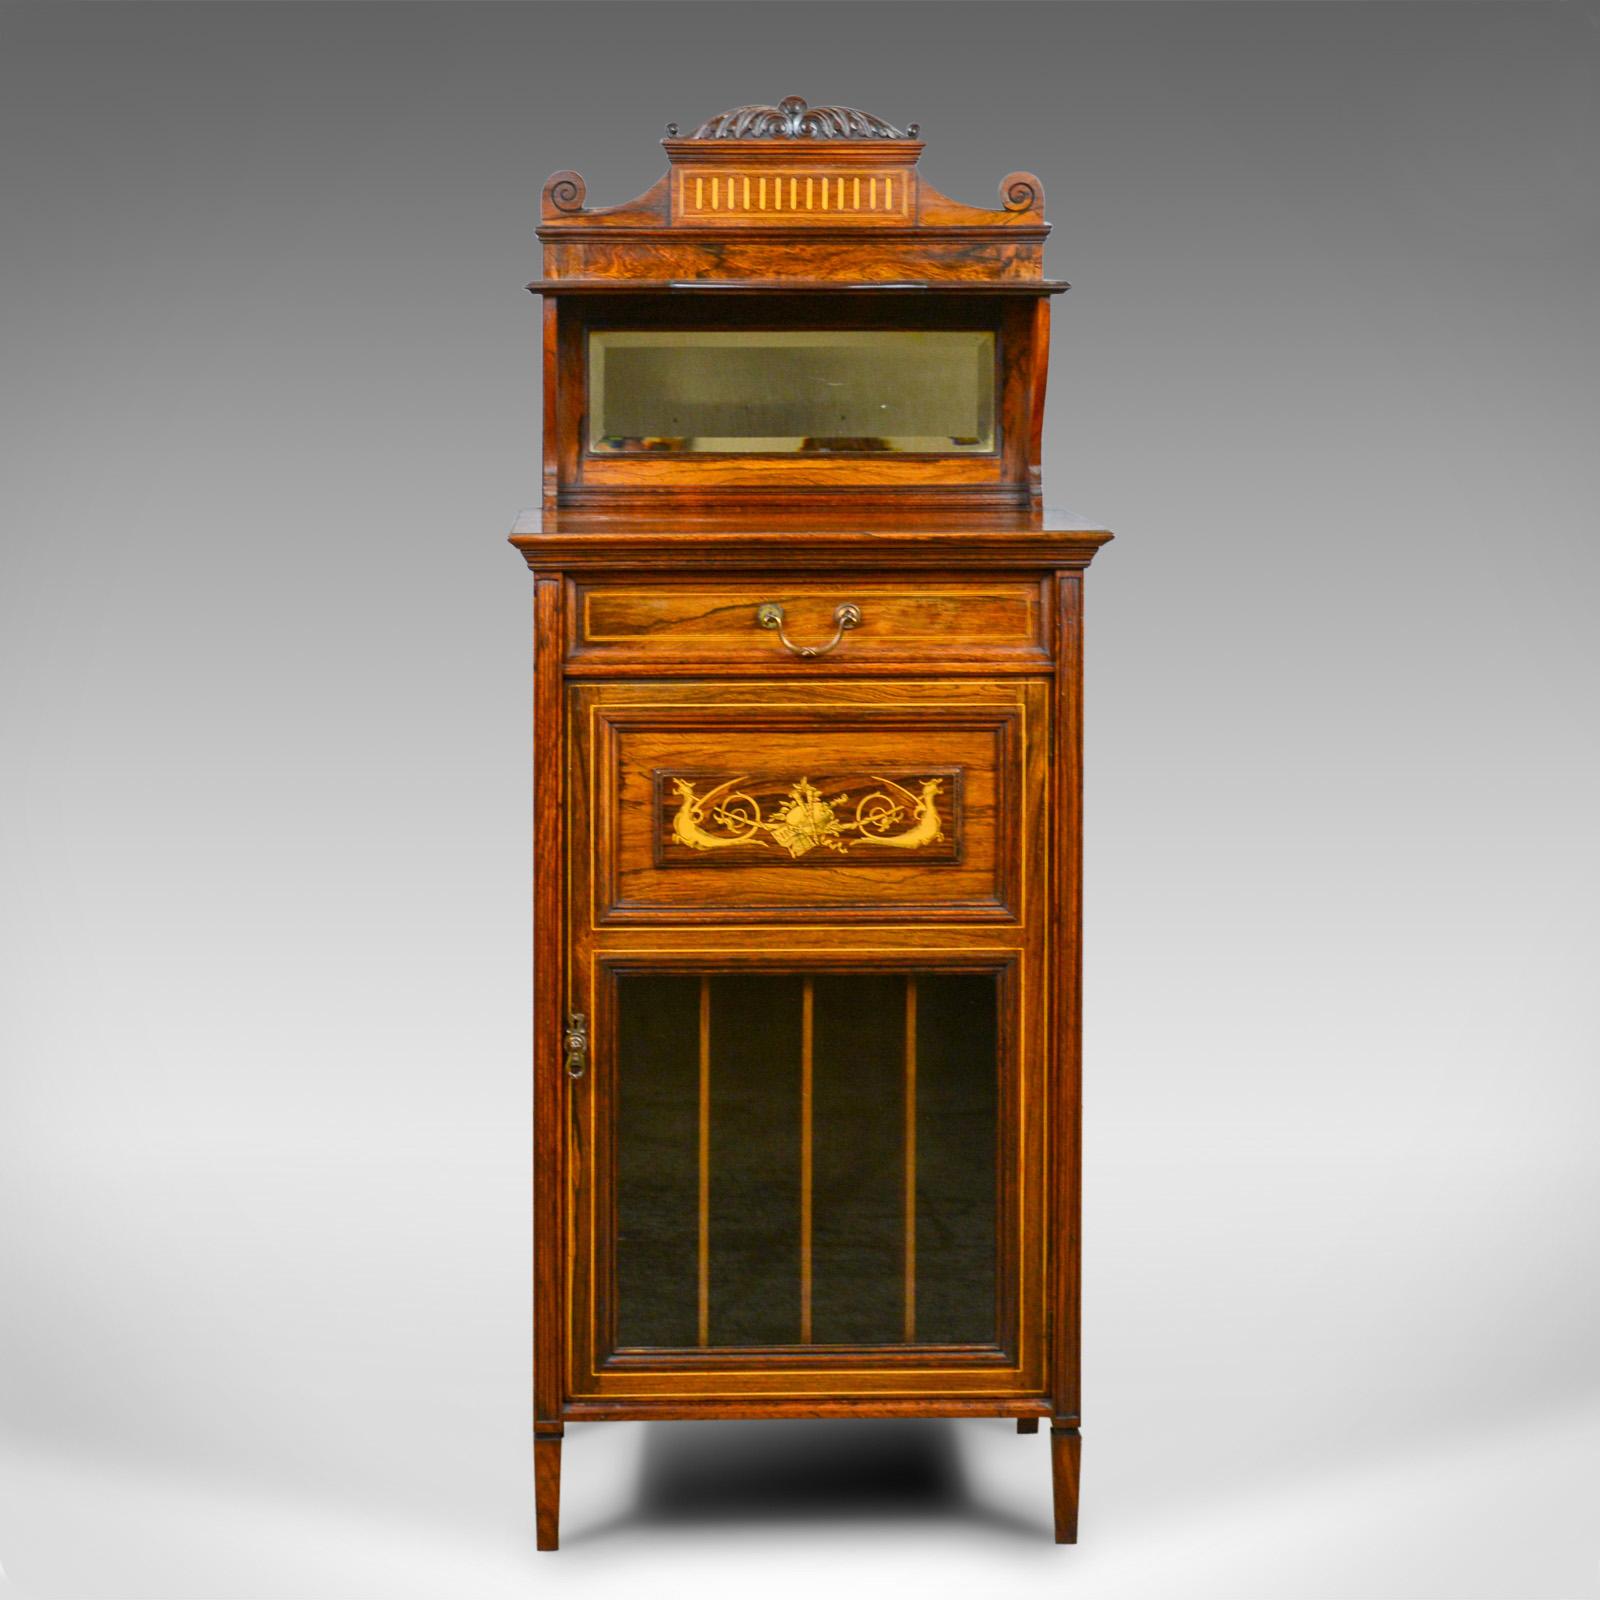 This is an antique music cabinet in rosewood. An English, Victorian, mirror back cupboard dating to the late 19th century, circa 1880.

Exceptional grain interest and color in the rosewood cabinetry
Displaying a desirable aged patina
Classical